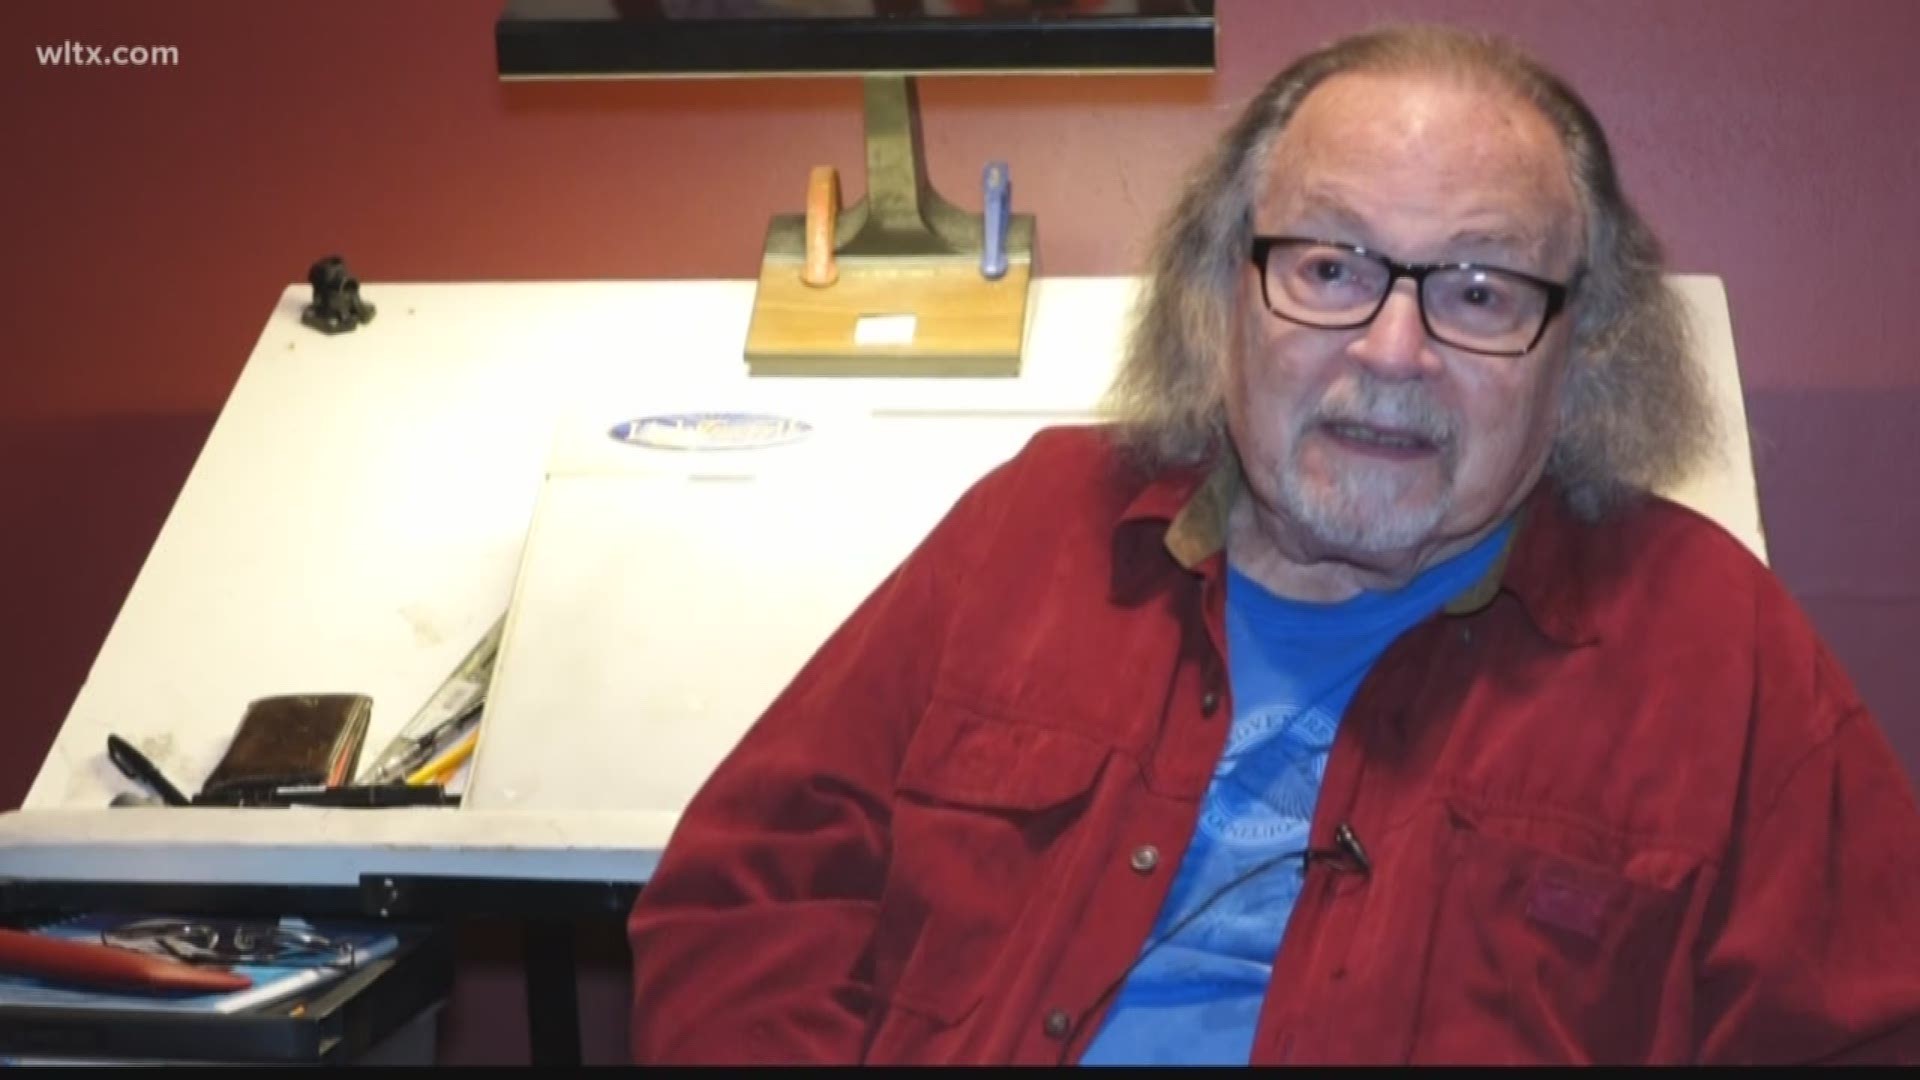 One Midlands comic book artist who used to work with Stan Lee is reacting to his death.